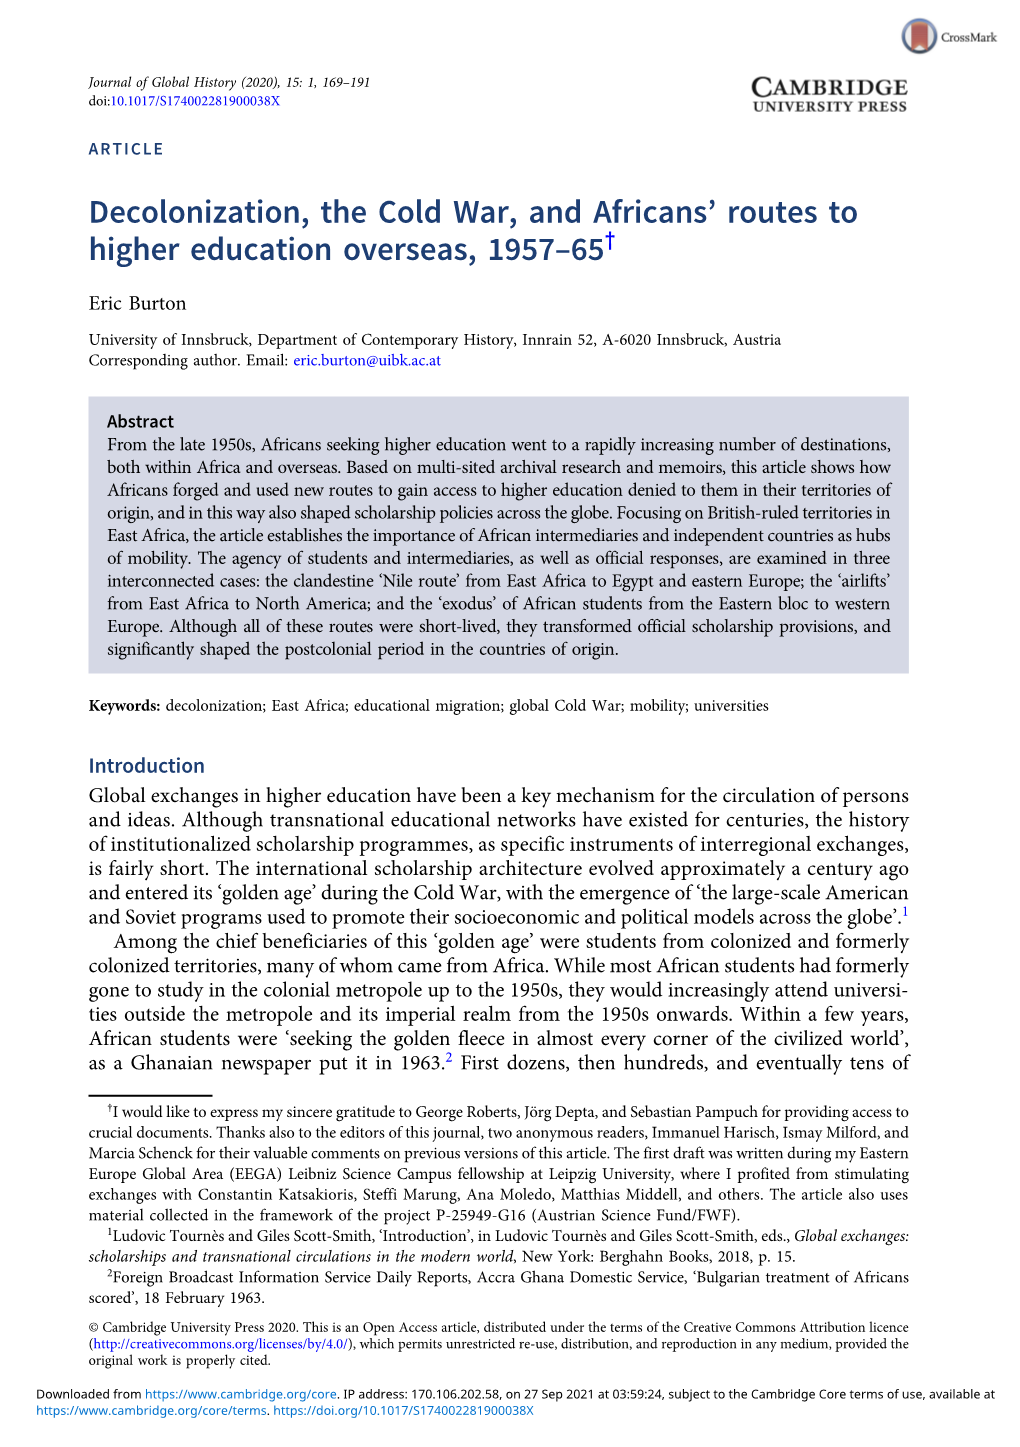 Decolonization, the Cold War, and Africans' Routes to Higher Education Overseas, 1957-65&Dagger